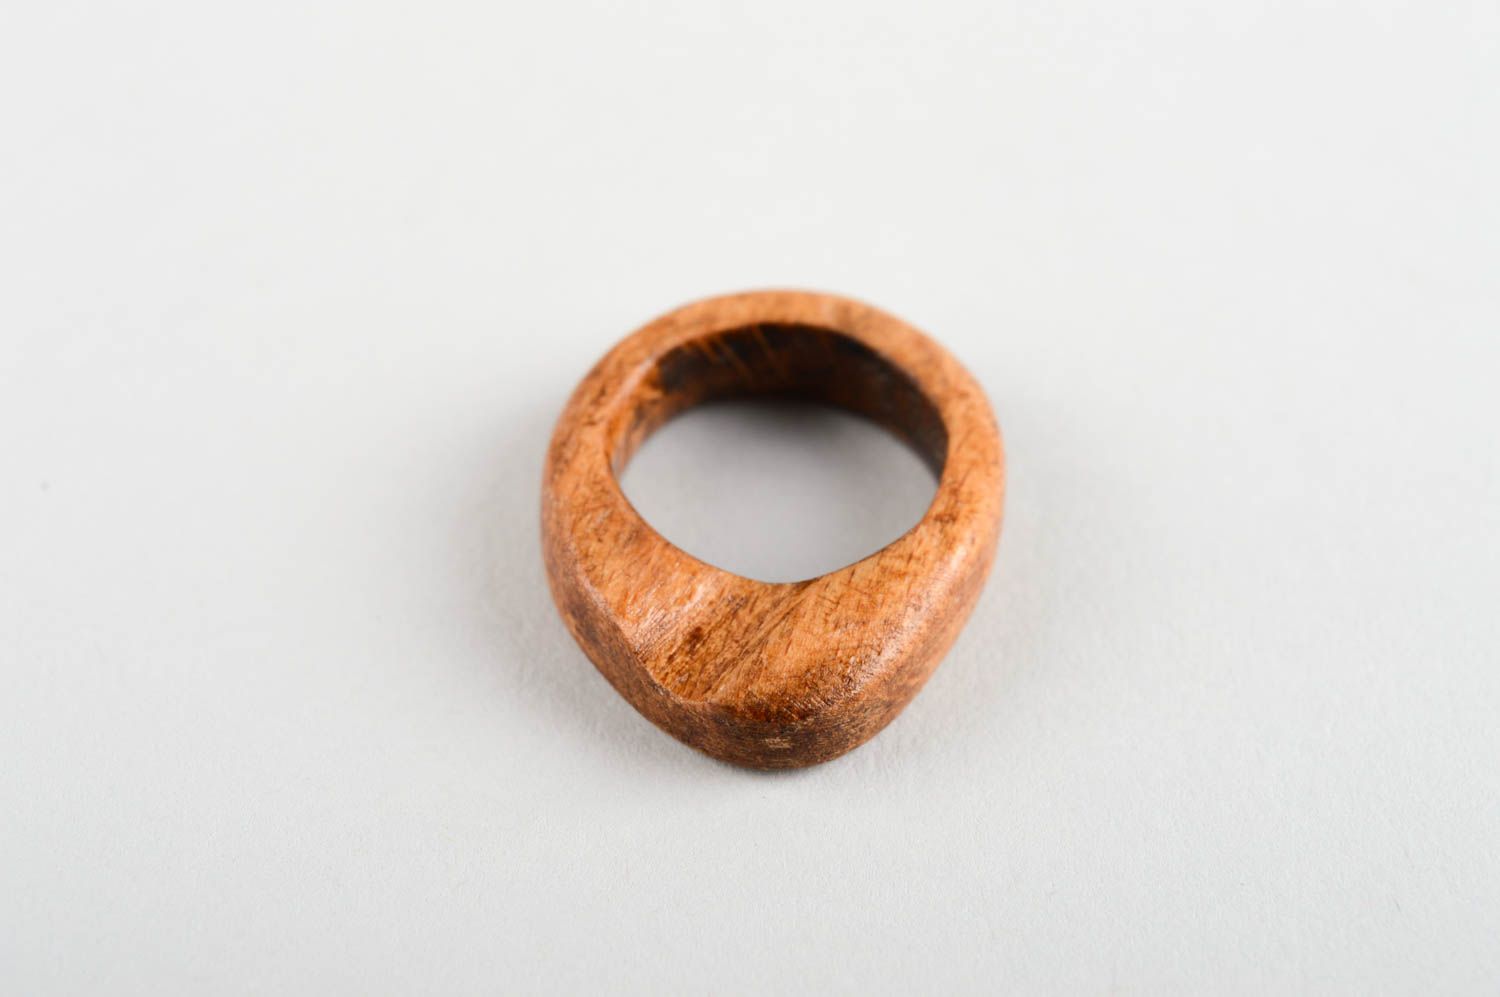 Unusual handmade wooden ring wood craft costume jewelry designs gifts for her photo 2